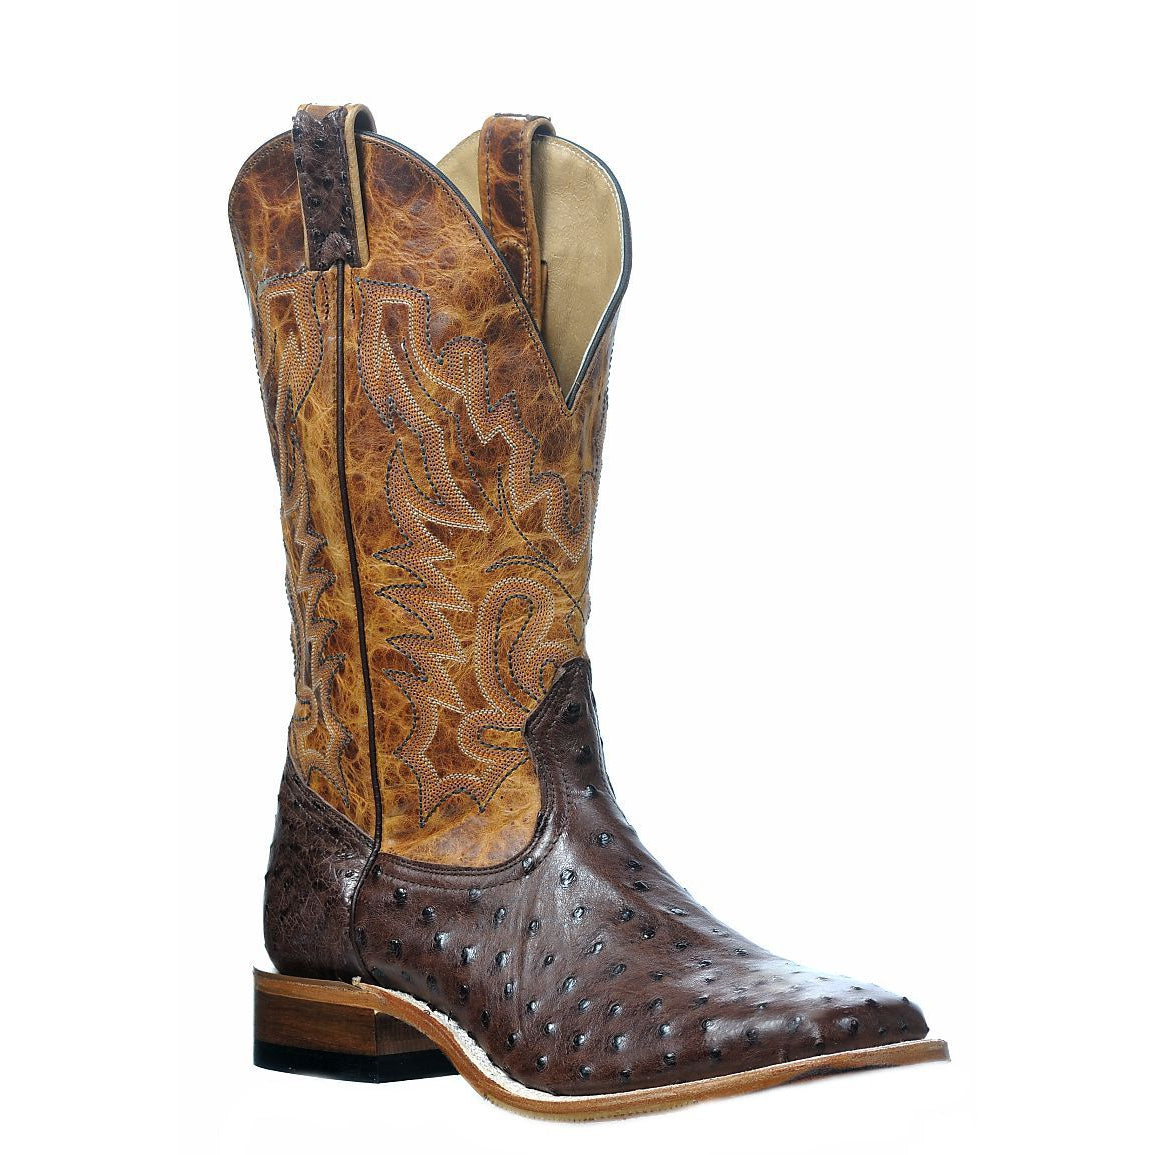 Boulet Men's Exotic Ostrich Western Boots - Lone Star Cognac/Ostrich Kango Tabac